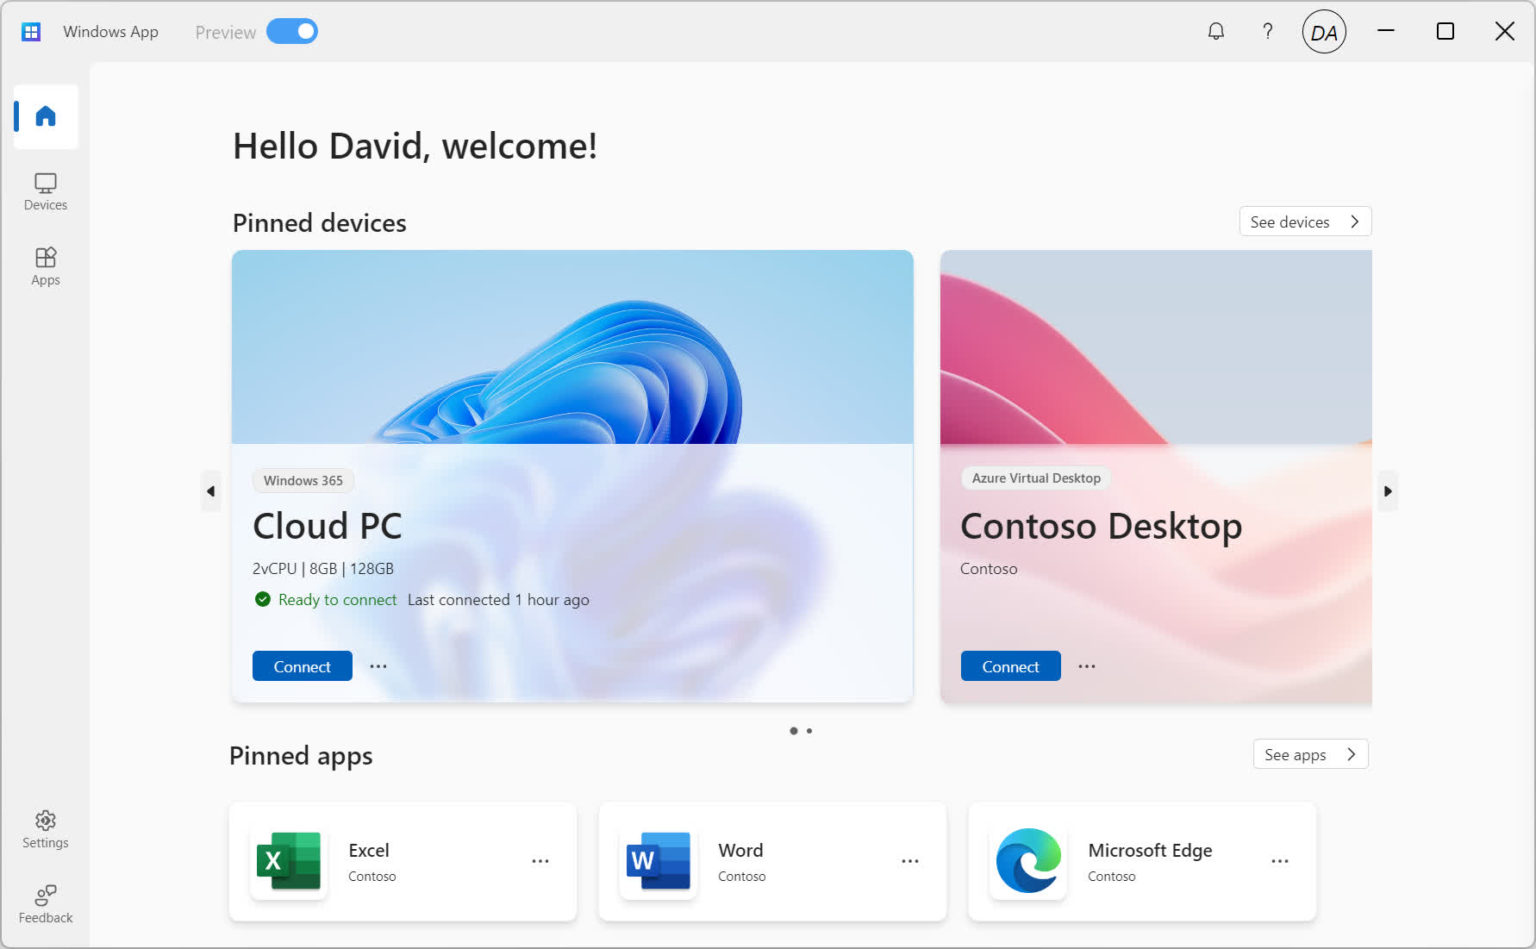 Windows is now an iPhone app, letting you stream a PC in the cloud